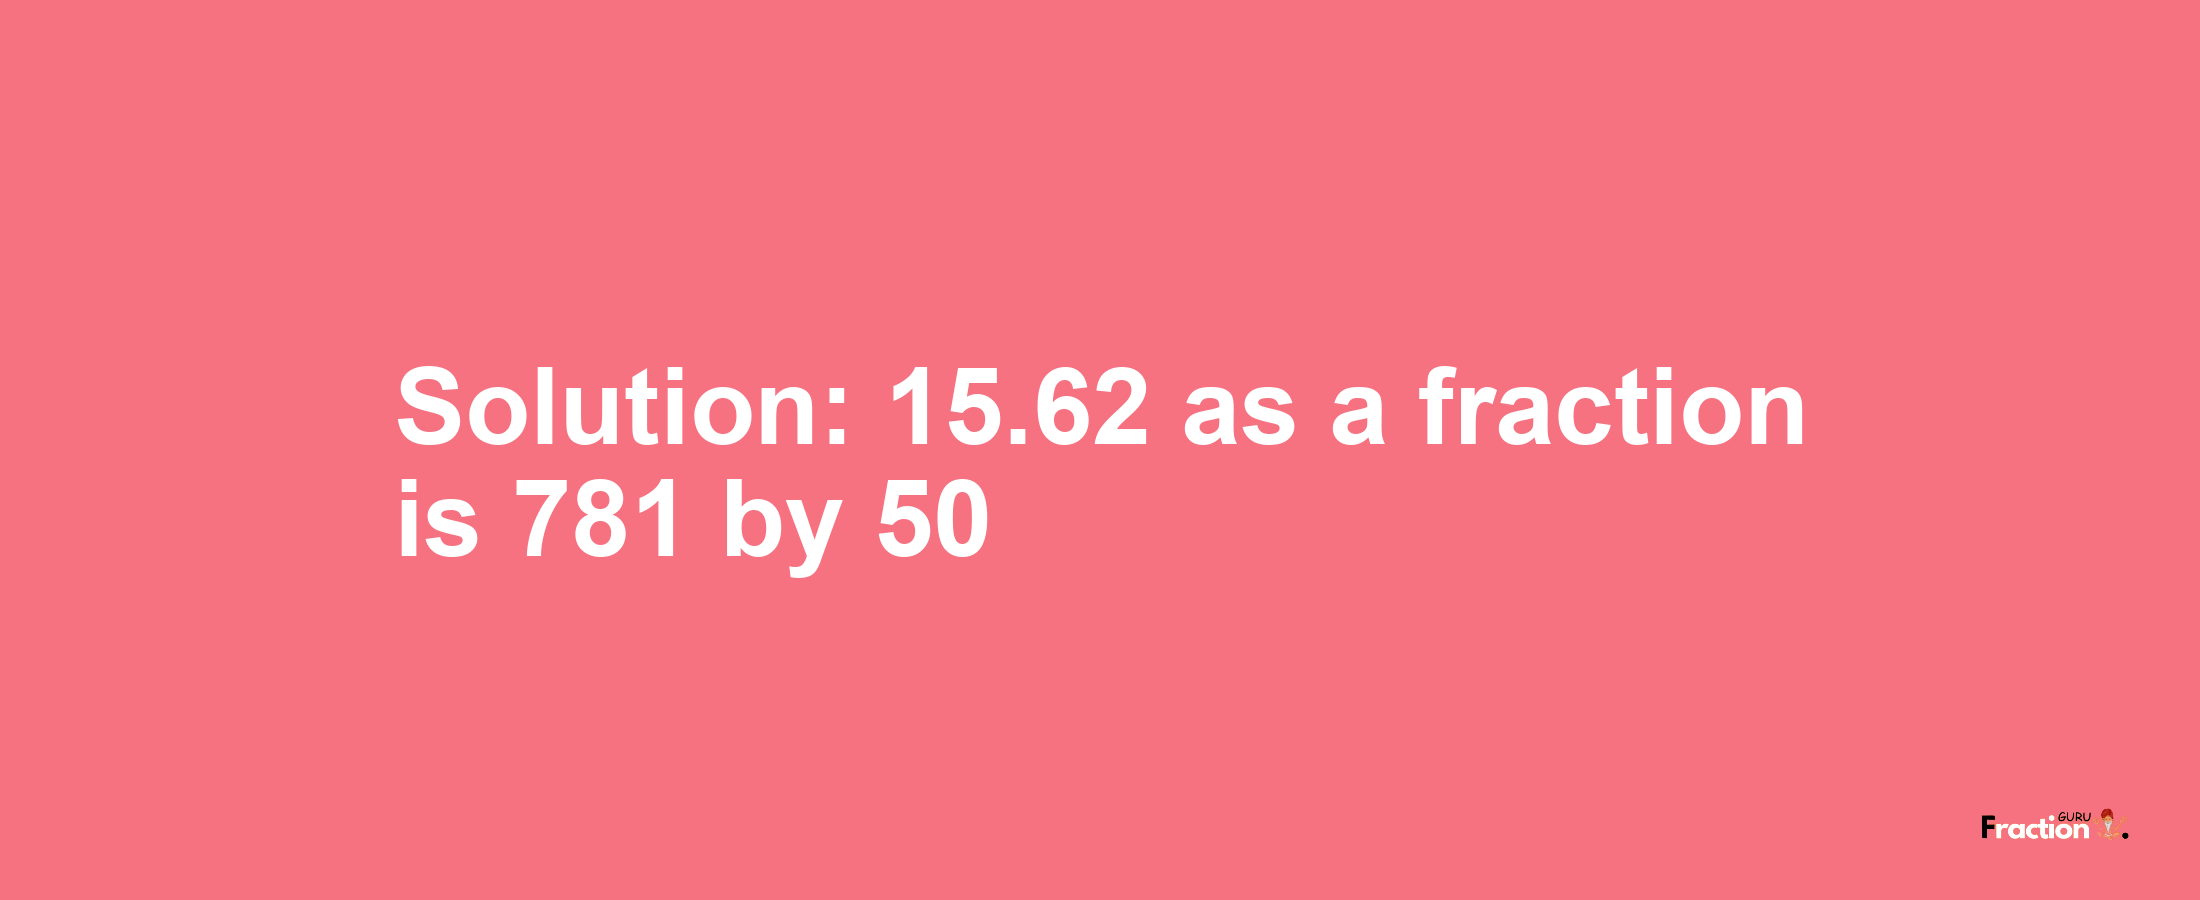 Solution:15.62 as a fraction is 781/50